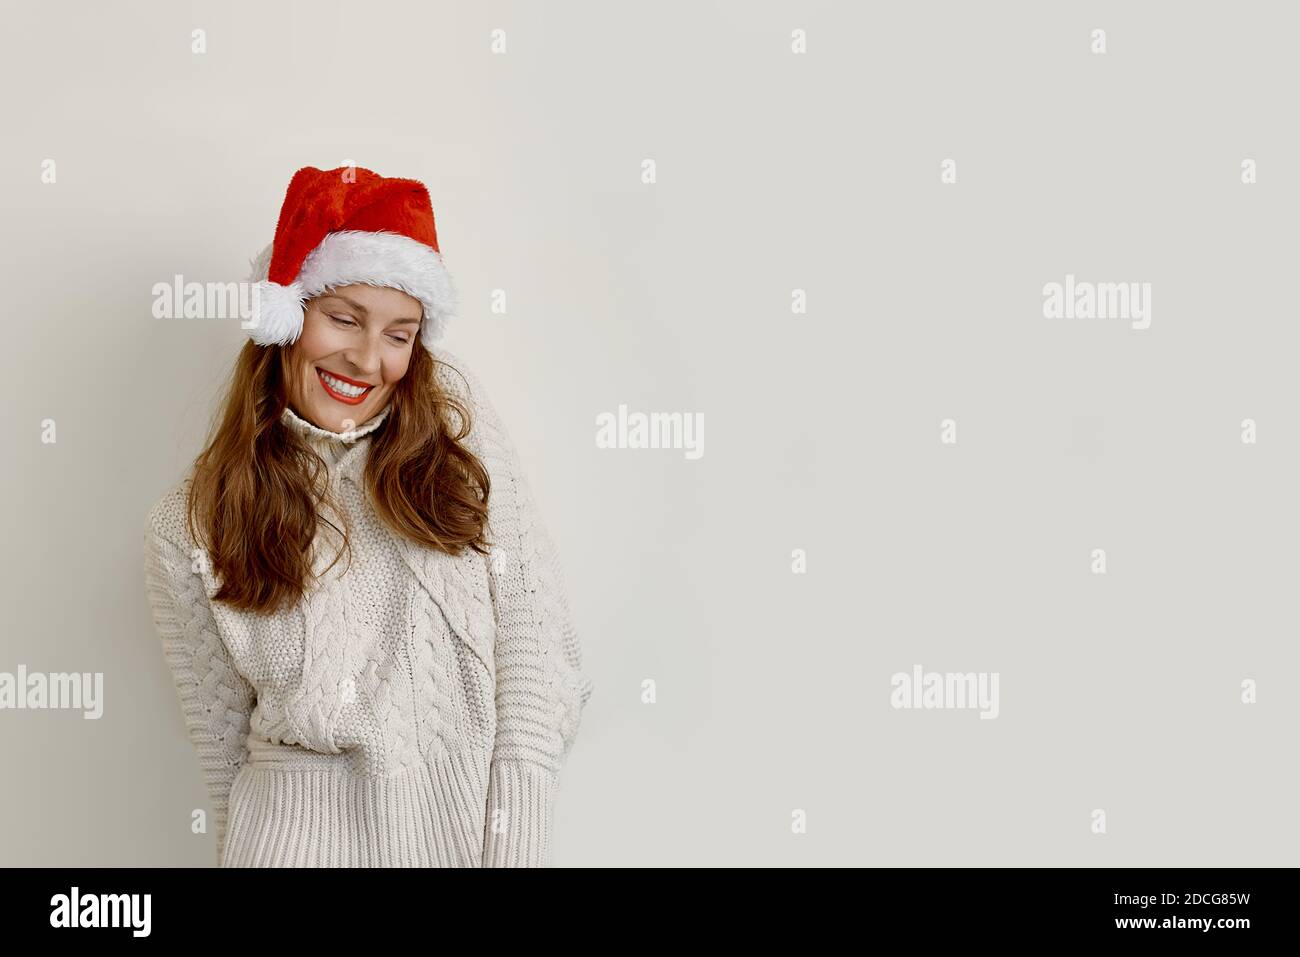 Woman wearing a sweater and a santa hat looking down and smiling Stock Photo